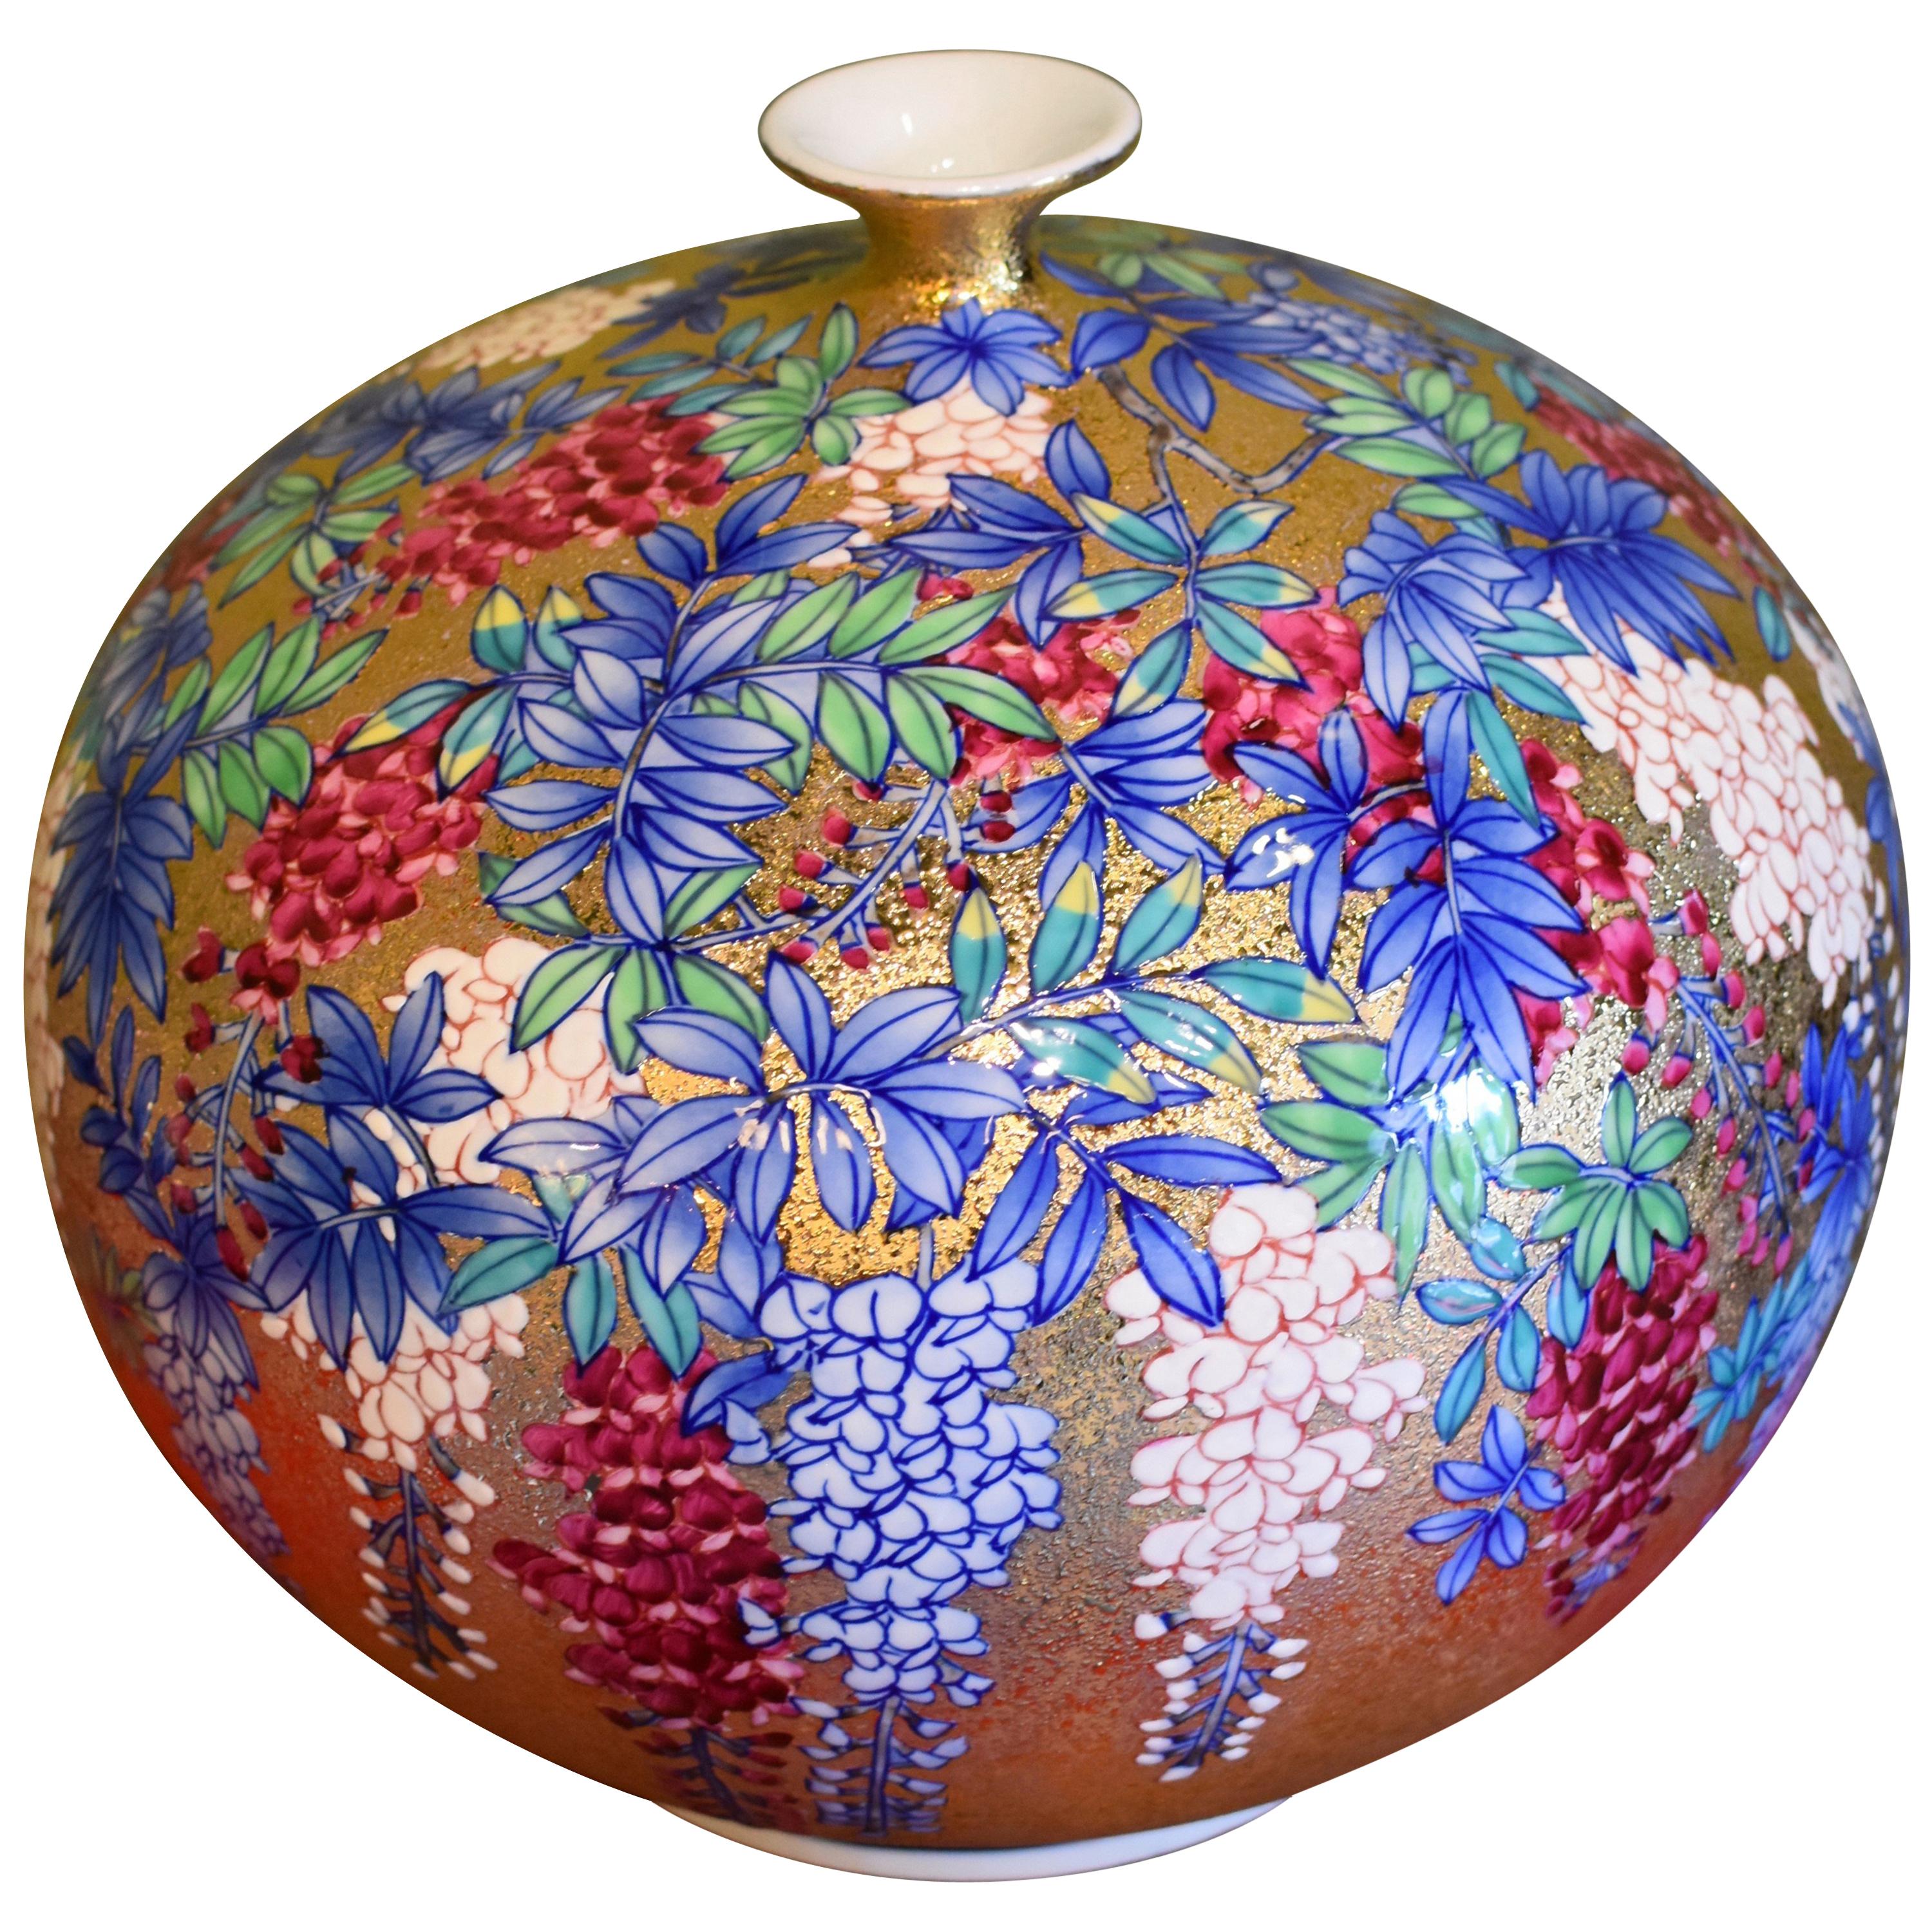 Japanese Imari Contemporary Gilded Porcelain Vase by Master Artist, Hand-Painted